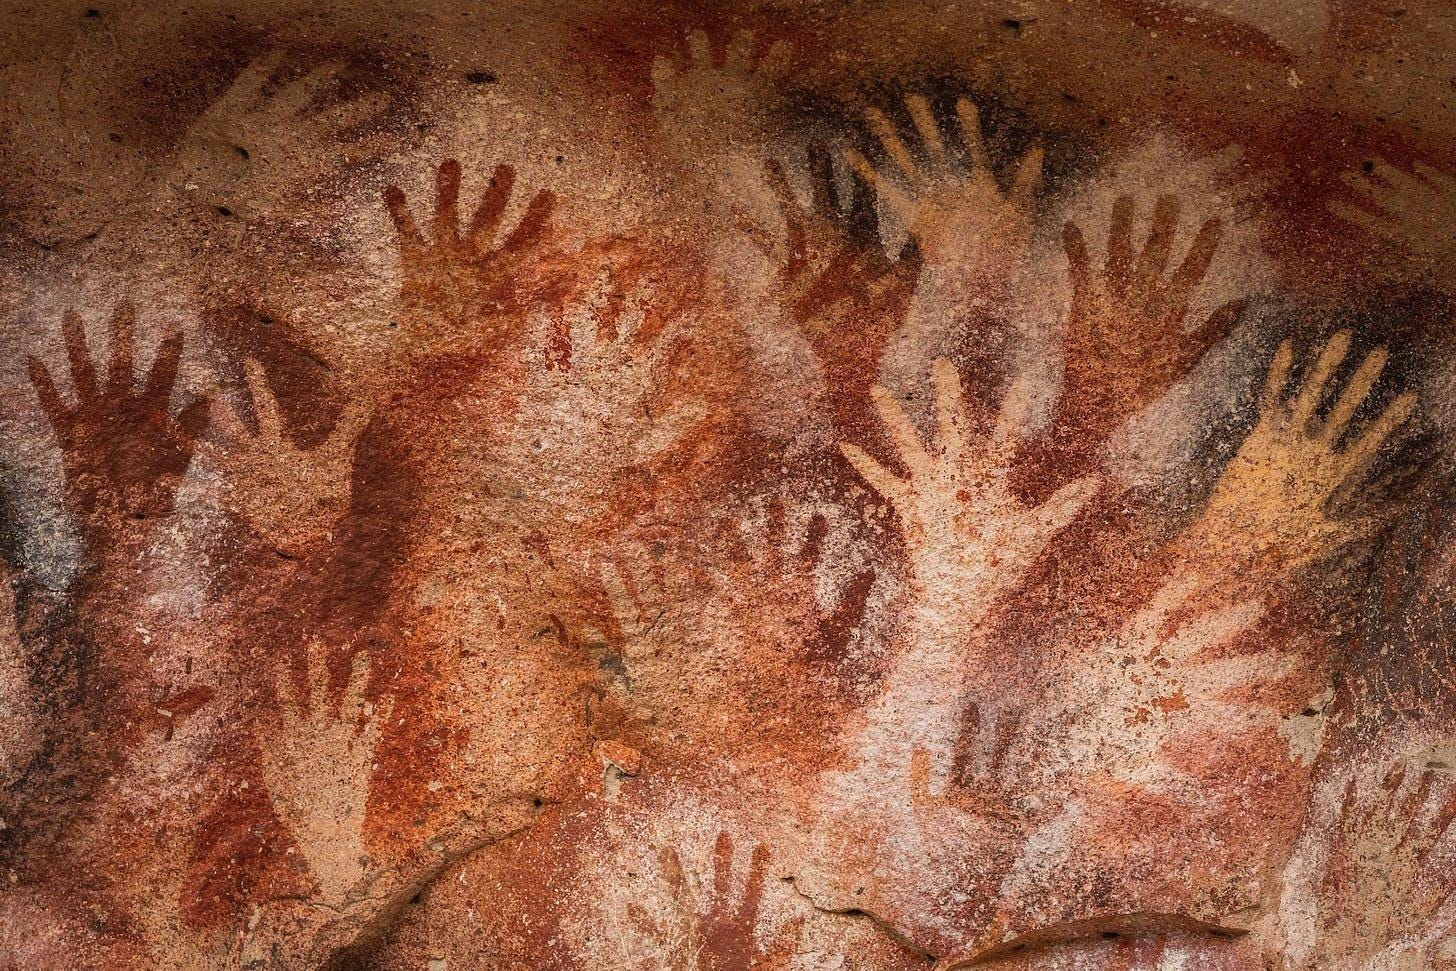 A close-up of a cave painting with Cueva de las Manos in the background

Description automatically generated